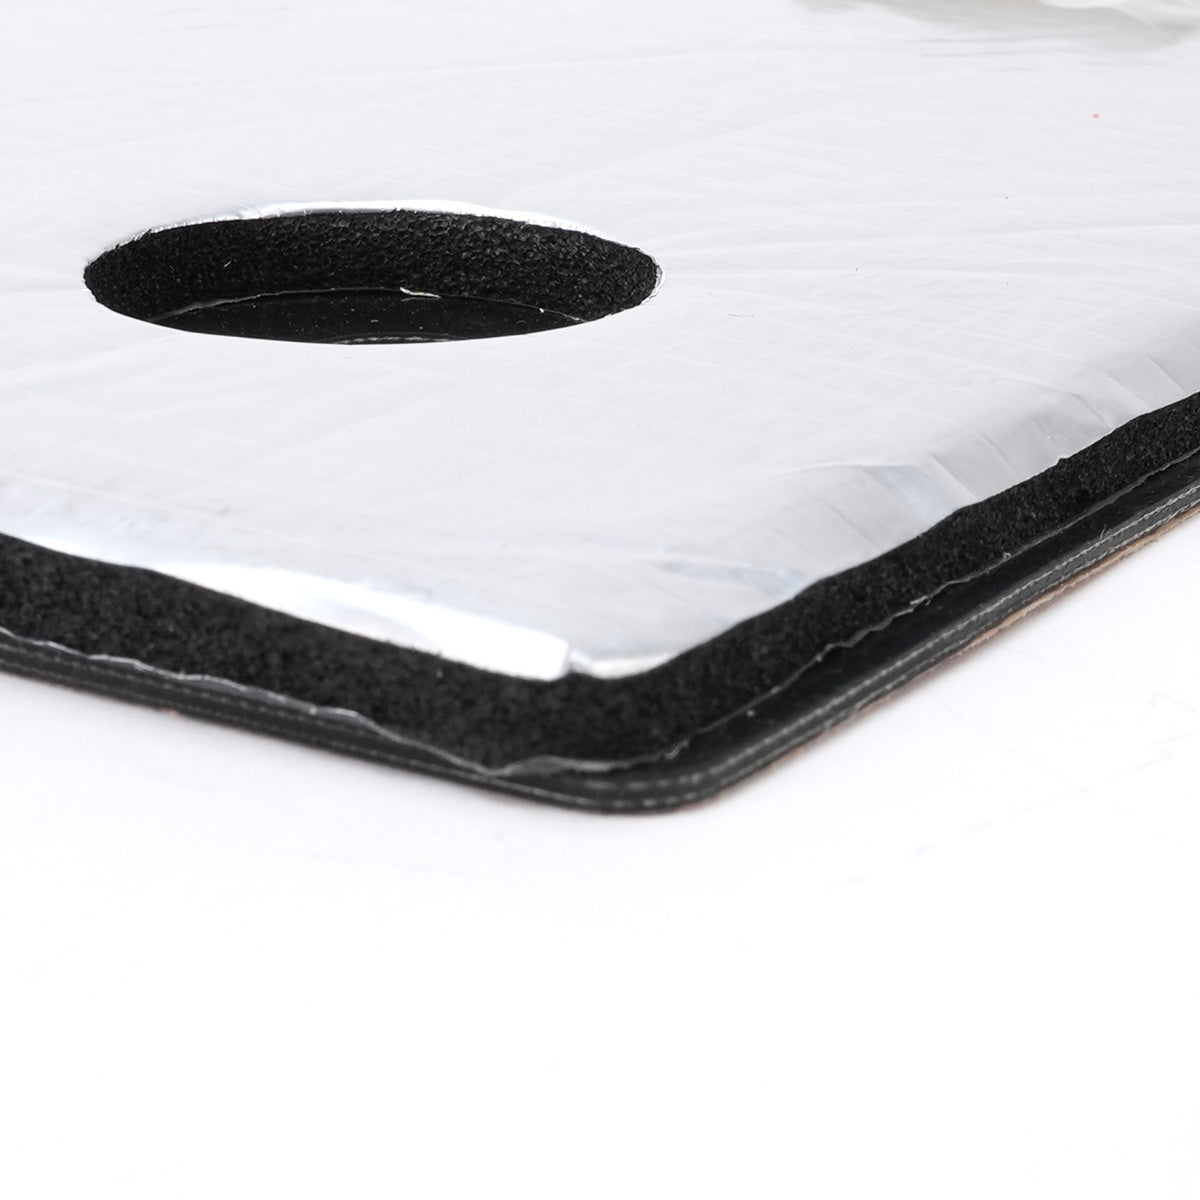 Heated Bed + Insulation Cotton Kit (220V) Genius